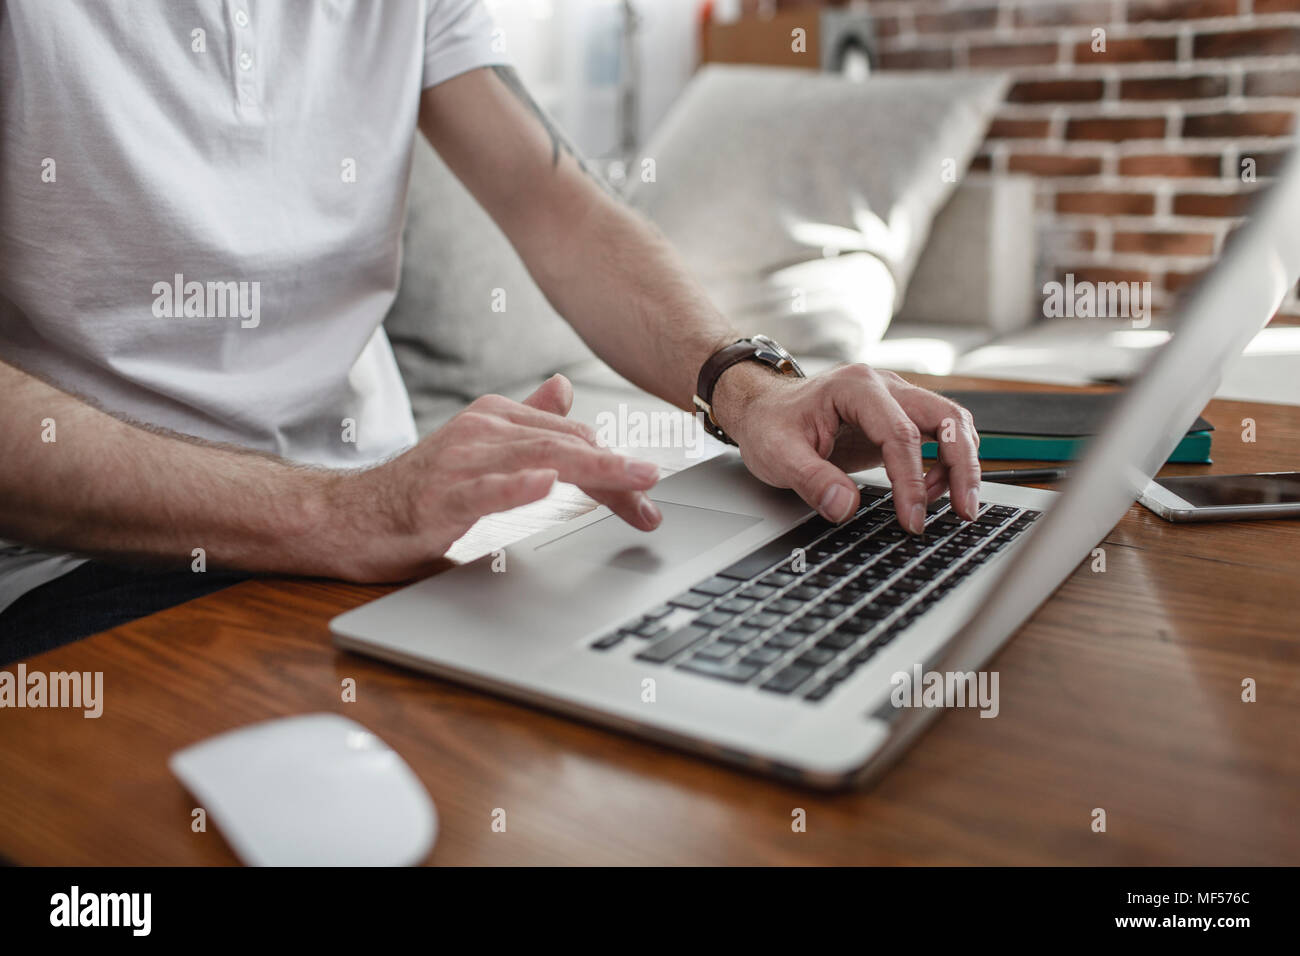 Man's hands on keyboard and touchpad of laptop, partial view Stock Photo